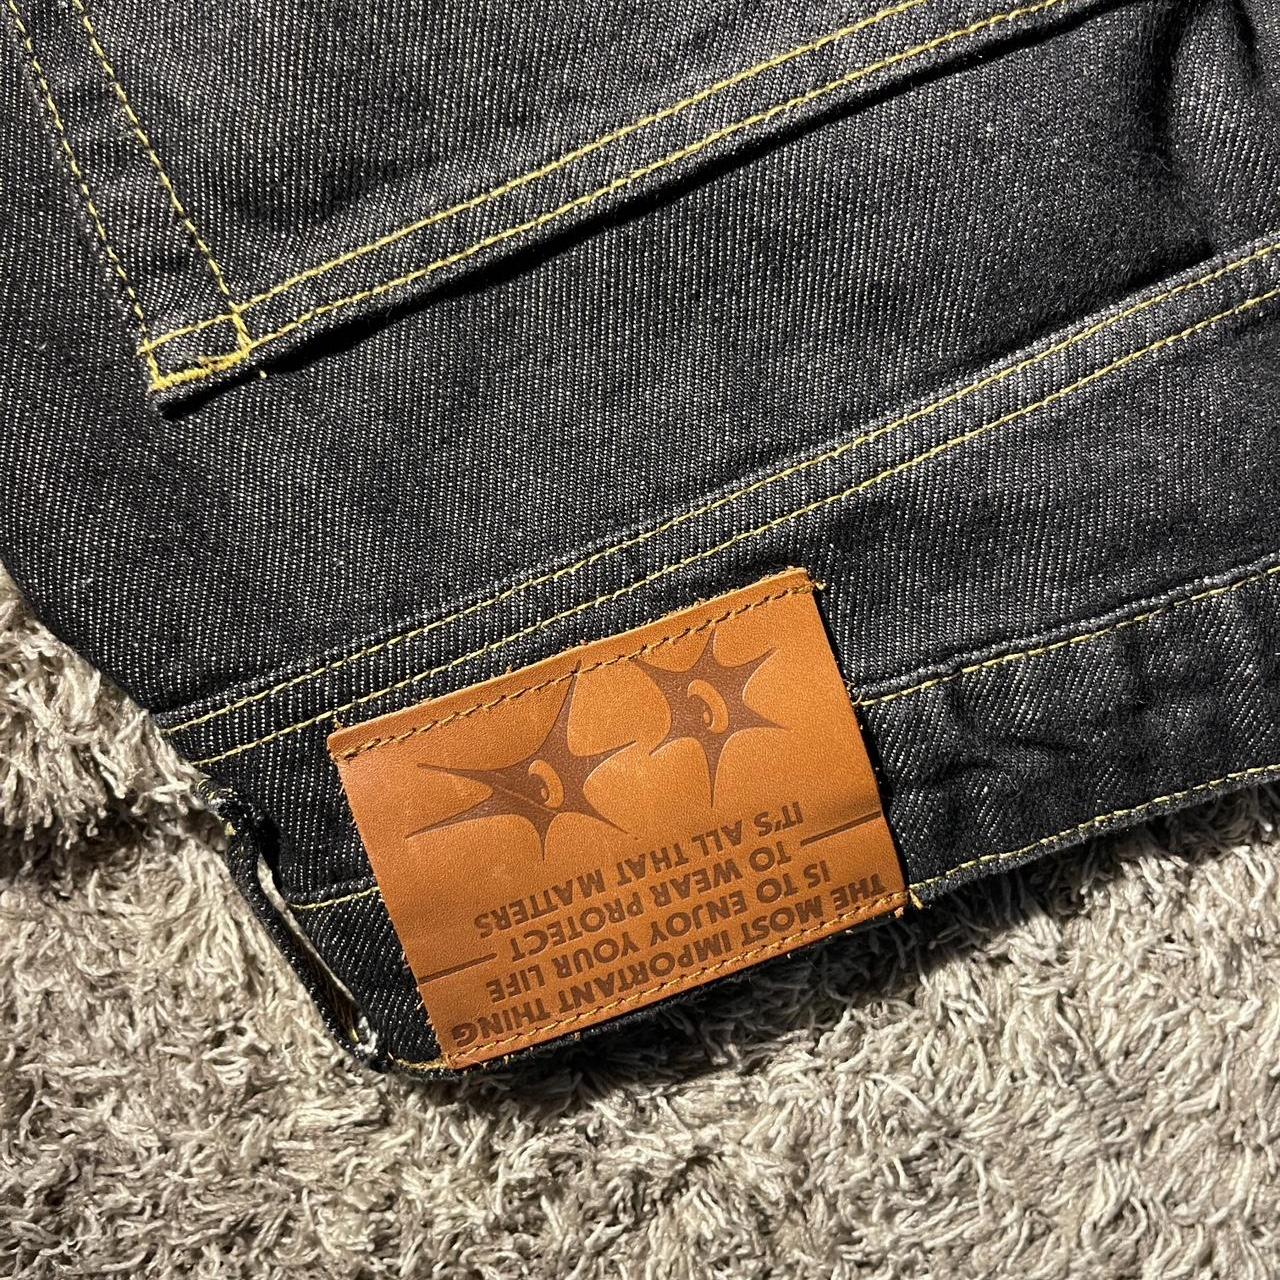 Protect London jeans size small awesome jeans - Depop